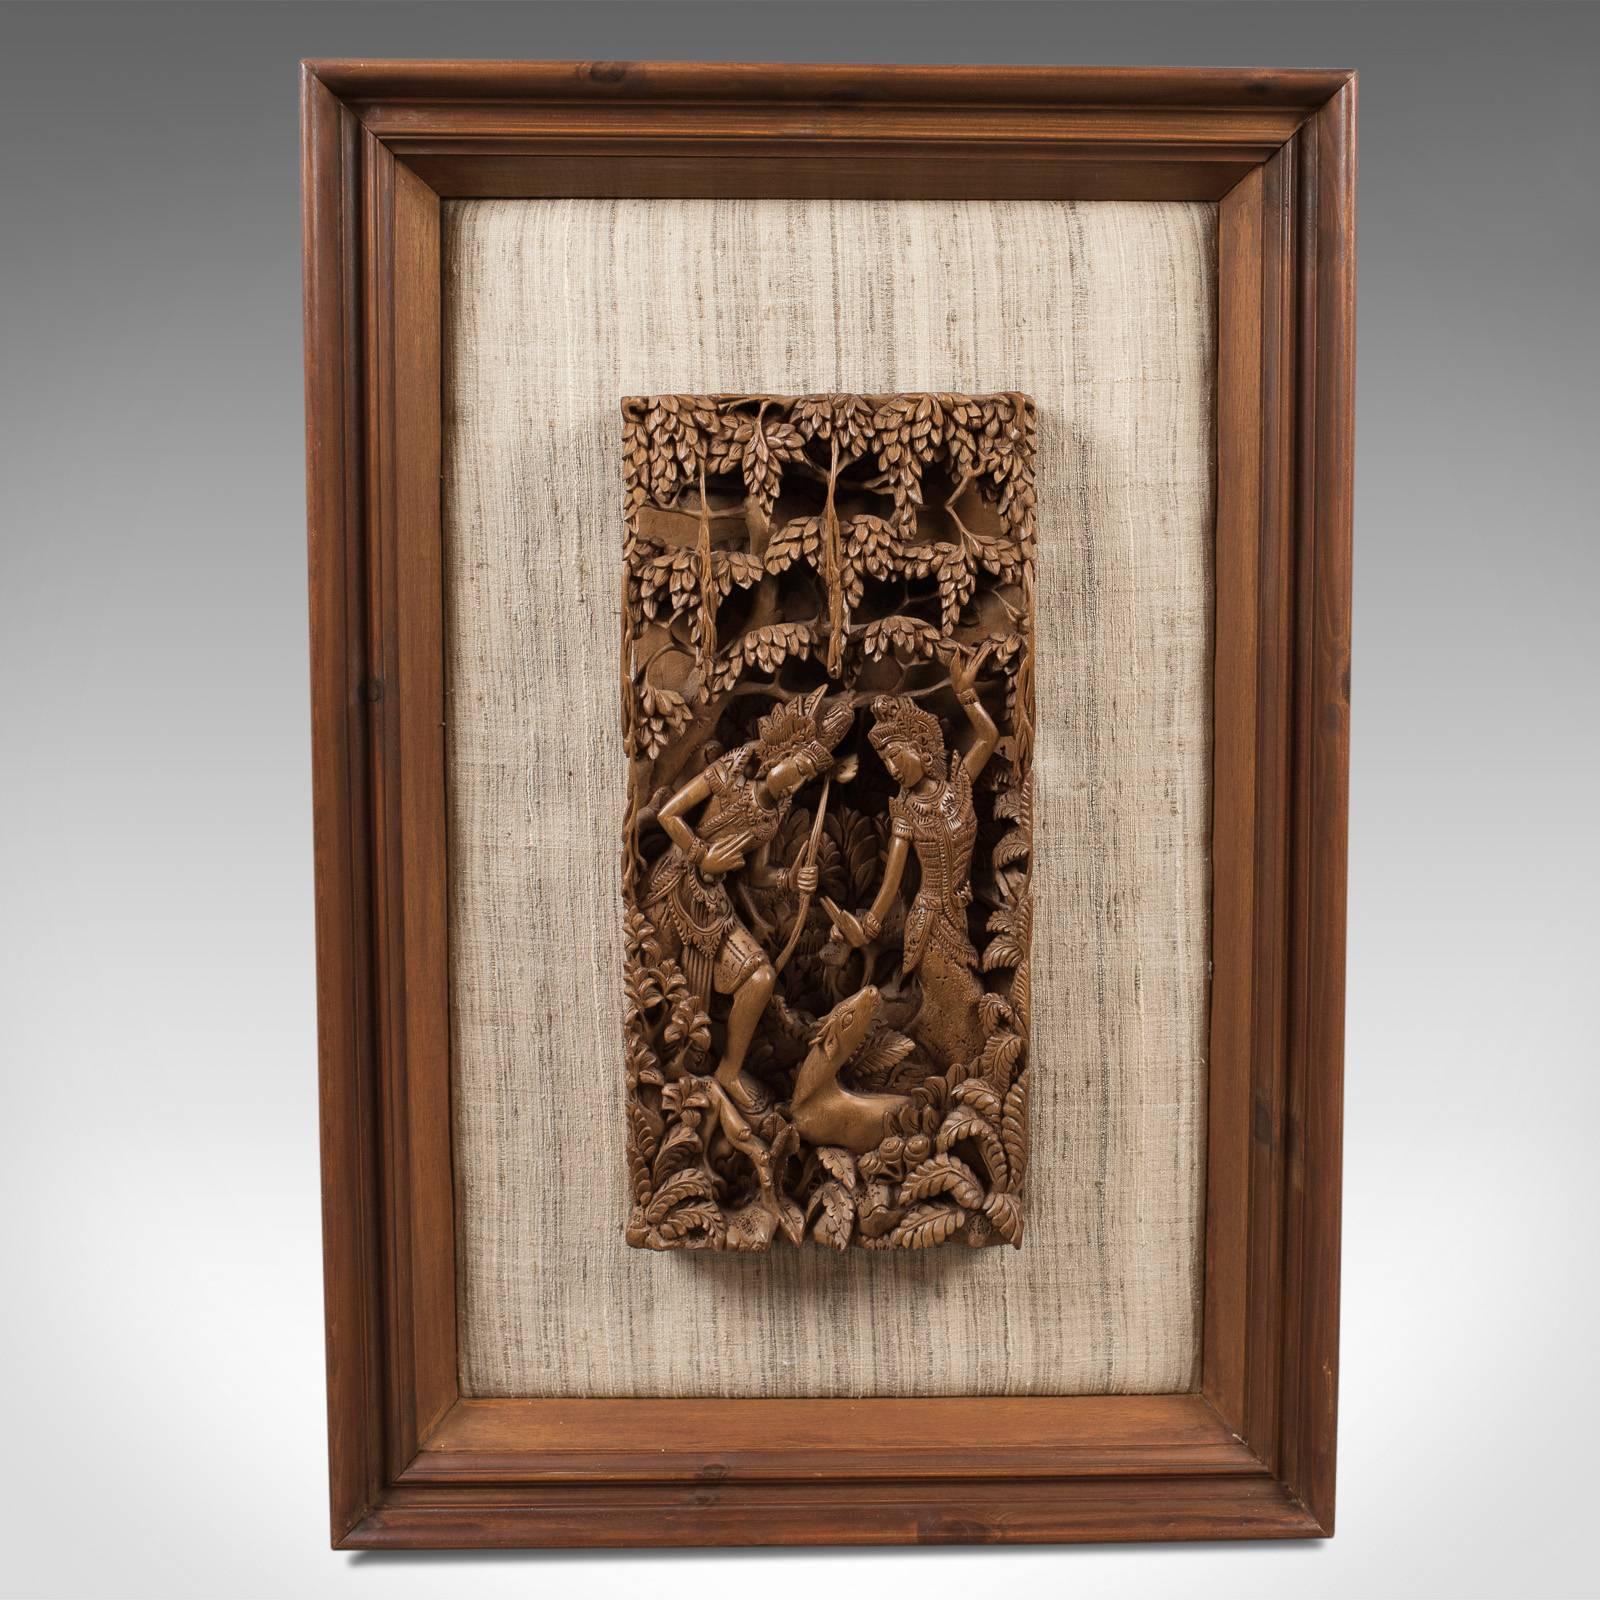 This is a framed Balinese carved wall panel, a piece of midcentury decorative art.

Profusely carved demonstrating exceptional skill
Created from a single, one and a half inch thick, teak slab
Abundant interest from every angle

A woodland